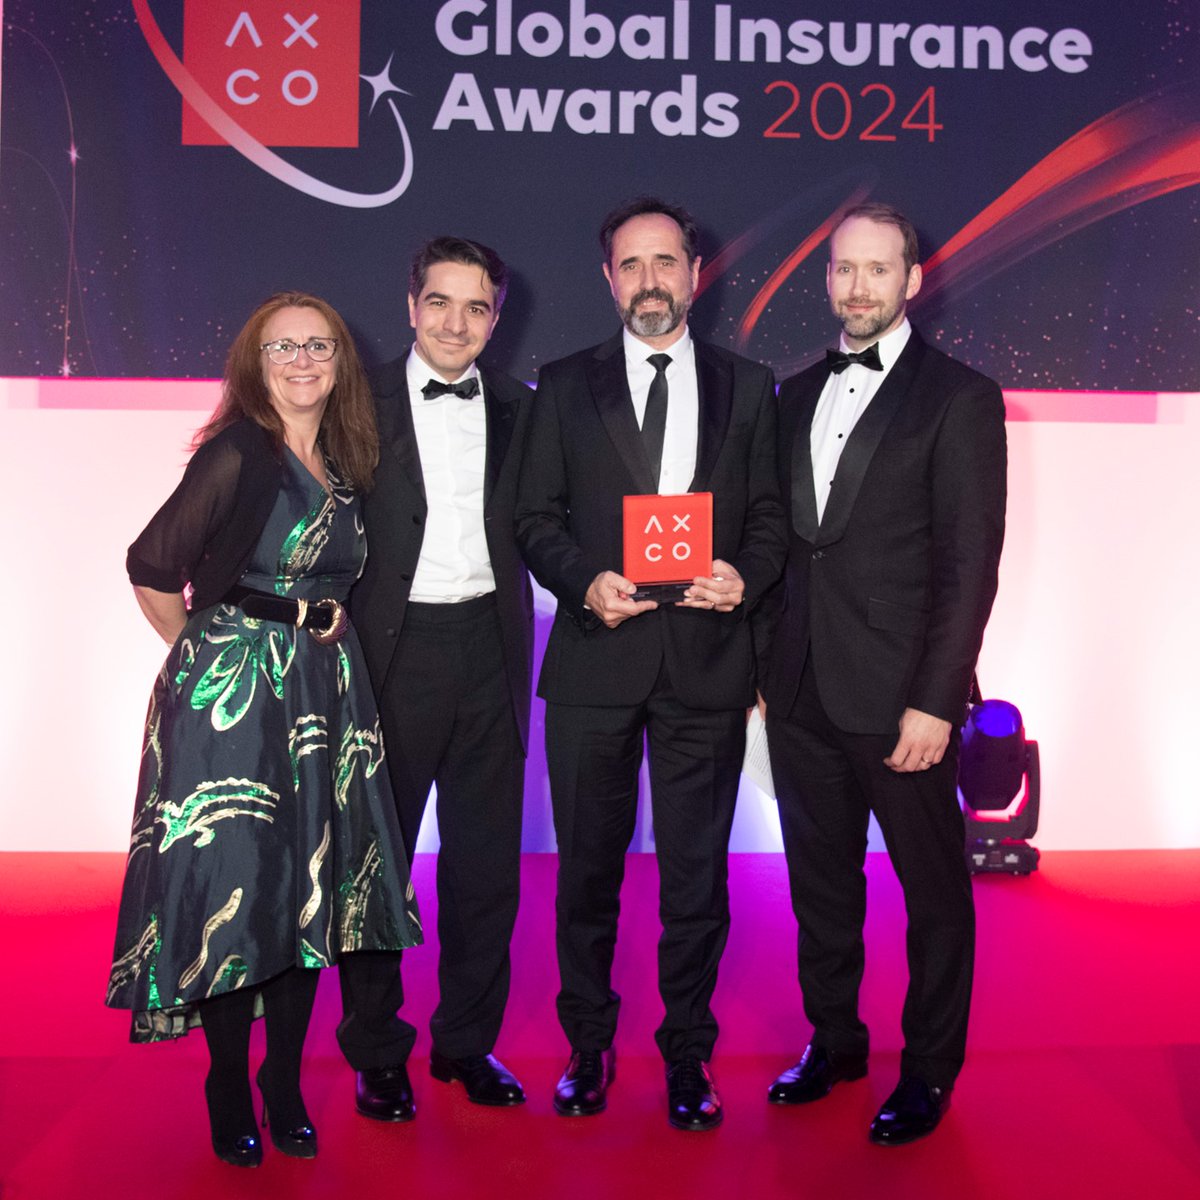 🏆 Best training initiative! 🏆 Our VR training solution – @AXA Immersive Solutions – was awarded 'Best Training Initiative in Global Risk' at the @AXCOinfo Global Insurance Awards 2024. Congratulations to all involved 👏🏽